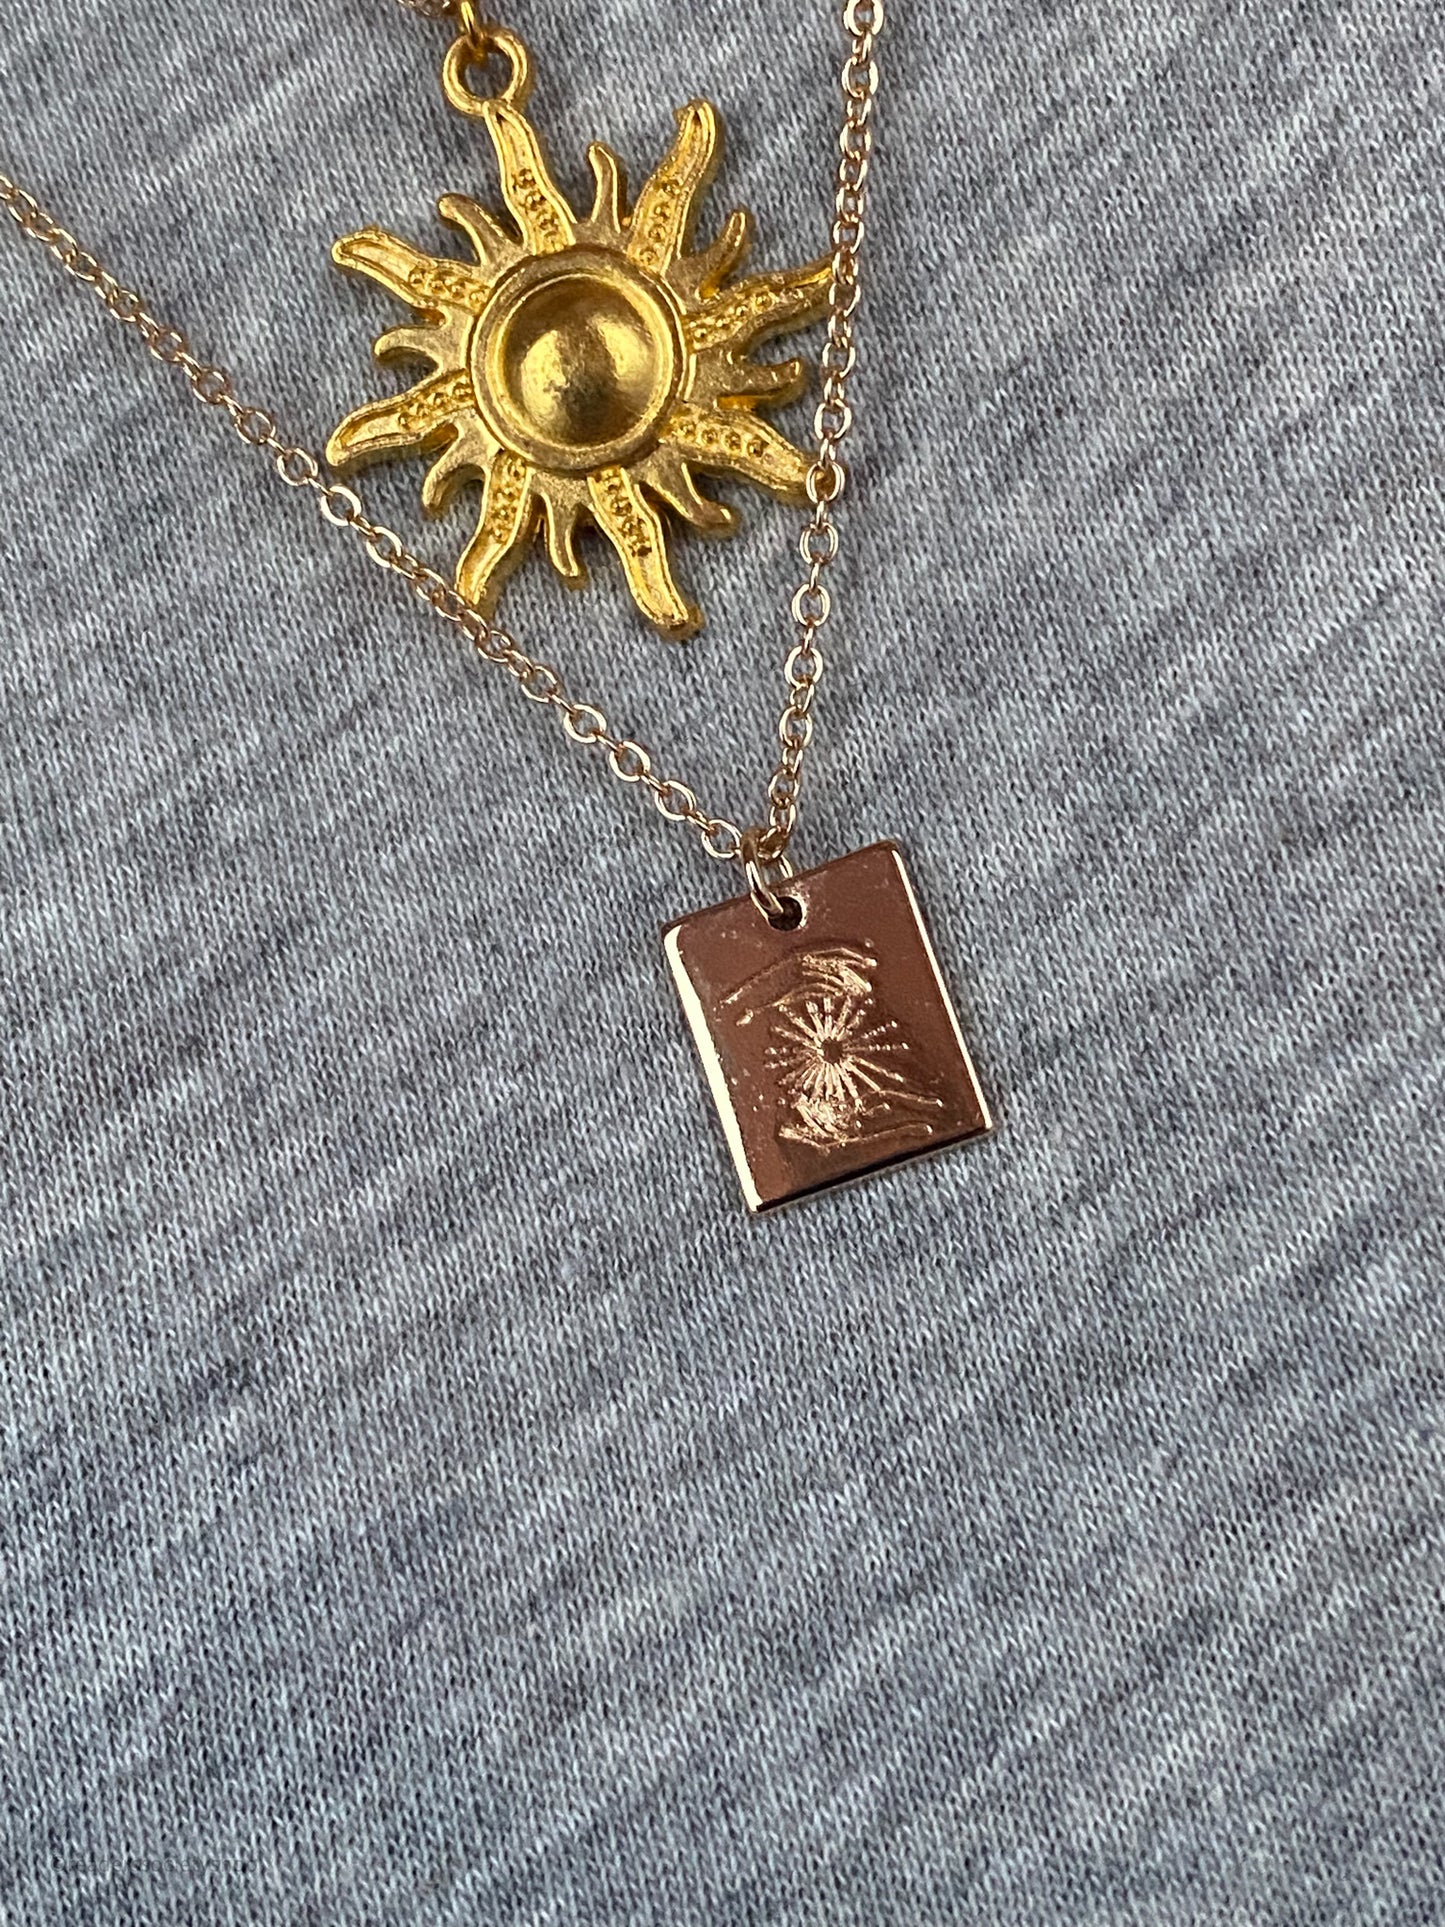 Summoners Necklace